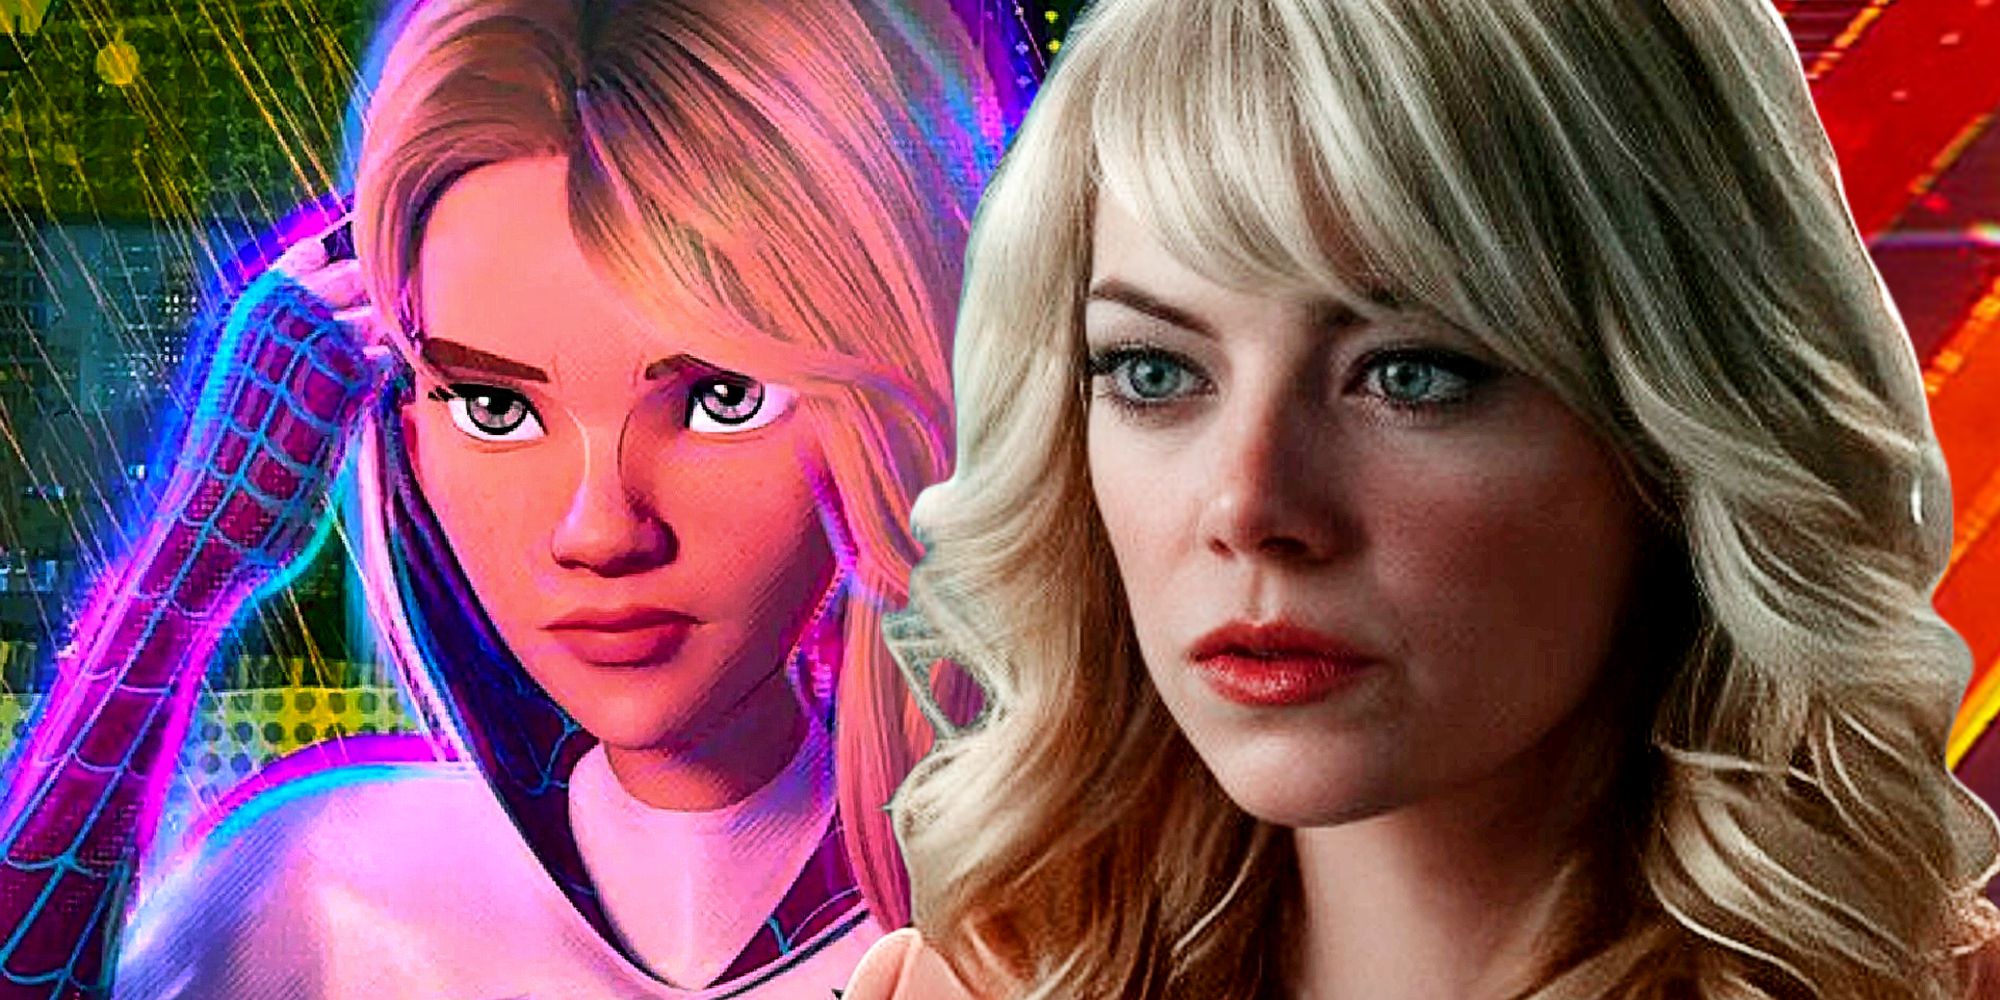 Emma Stone as Gwen Stacy in The Amazing Spider-Man and Across the Spider-Verse